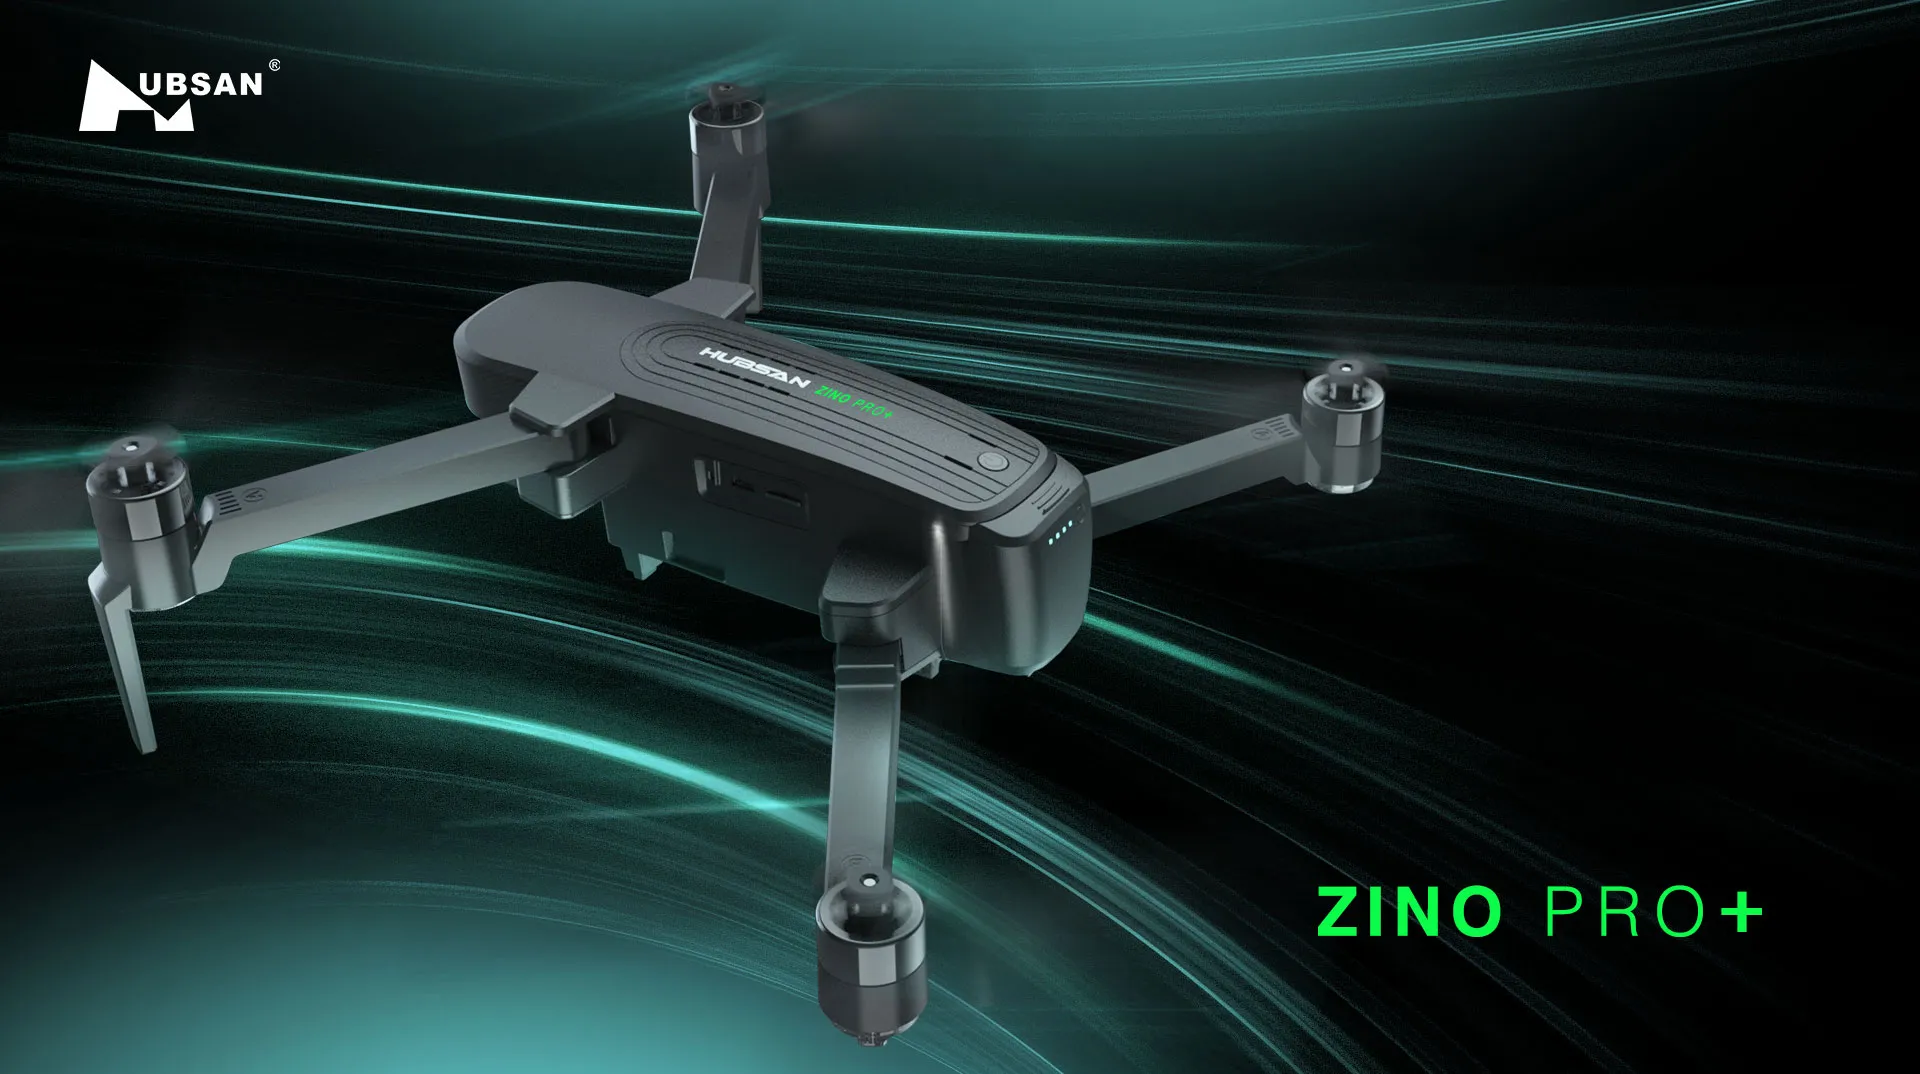 Hipac Hubsan Zino Pro Plus Drone GPS with 4K Camera Full HD 43Mins 3 axis Gimbal Brushless Profissional Dron 4k GPS Quadrocopter1282665